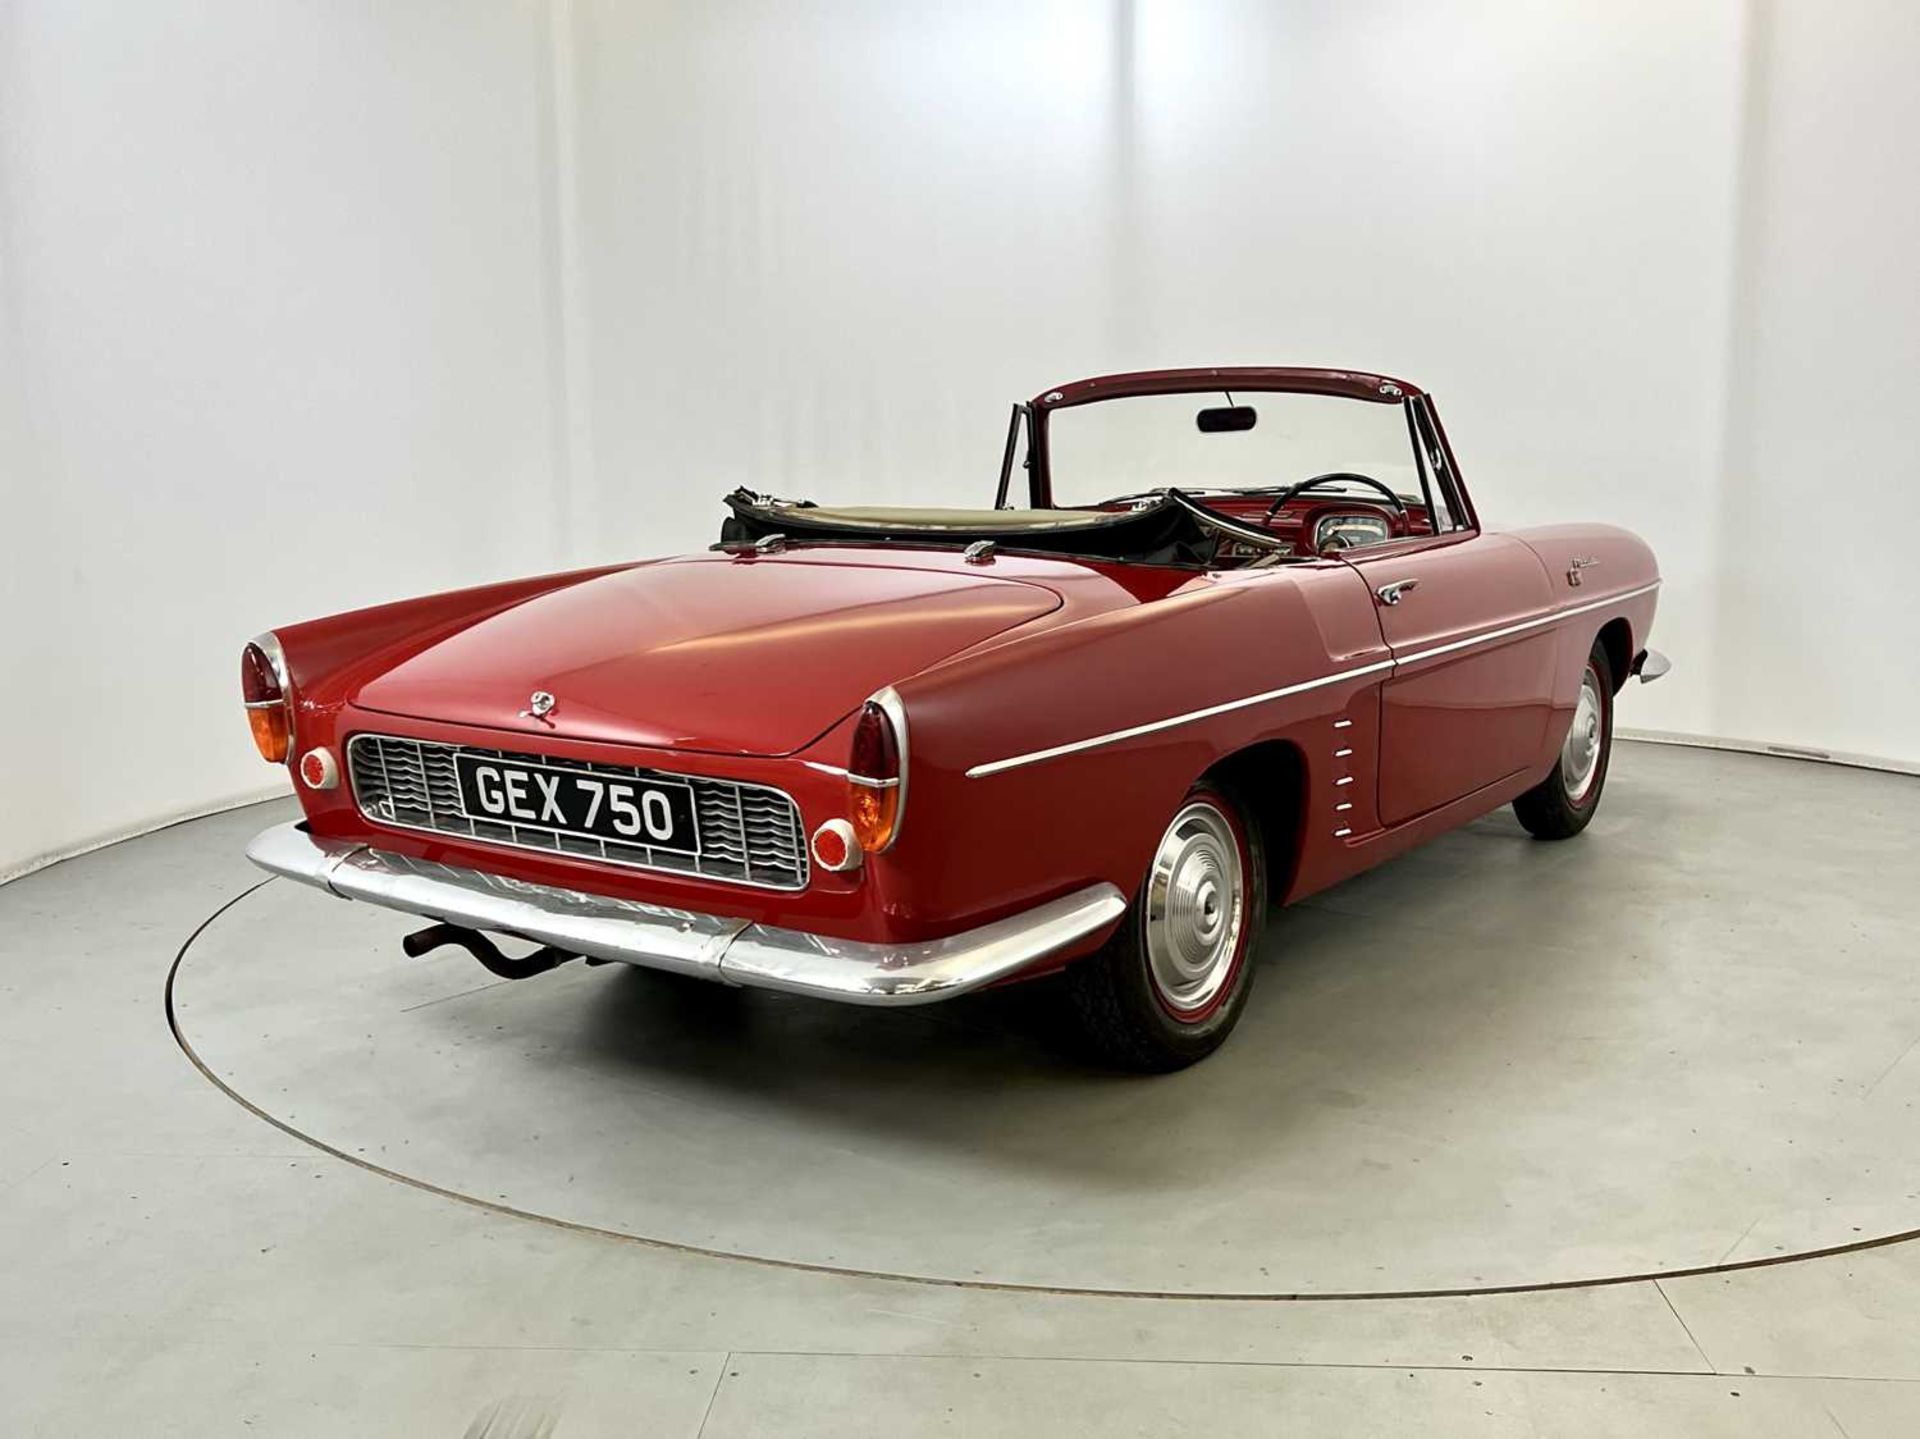 1962 Renault Floride Convertible - Image 22 of 43